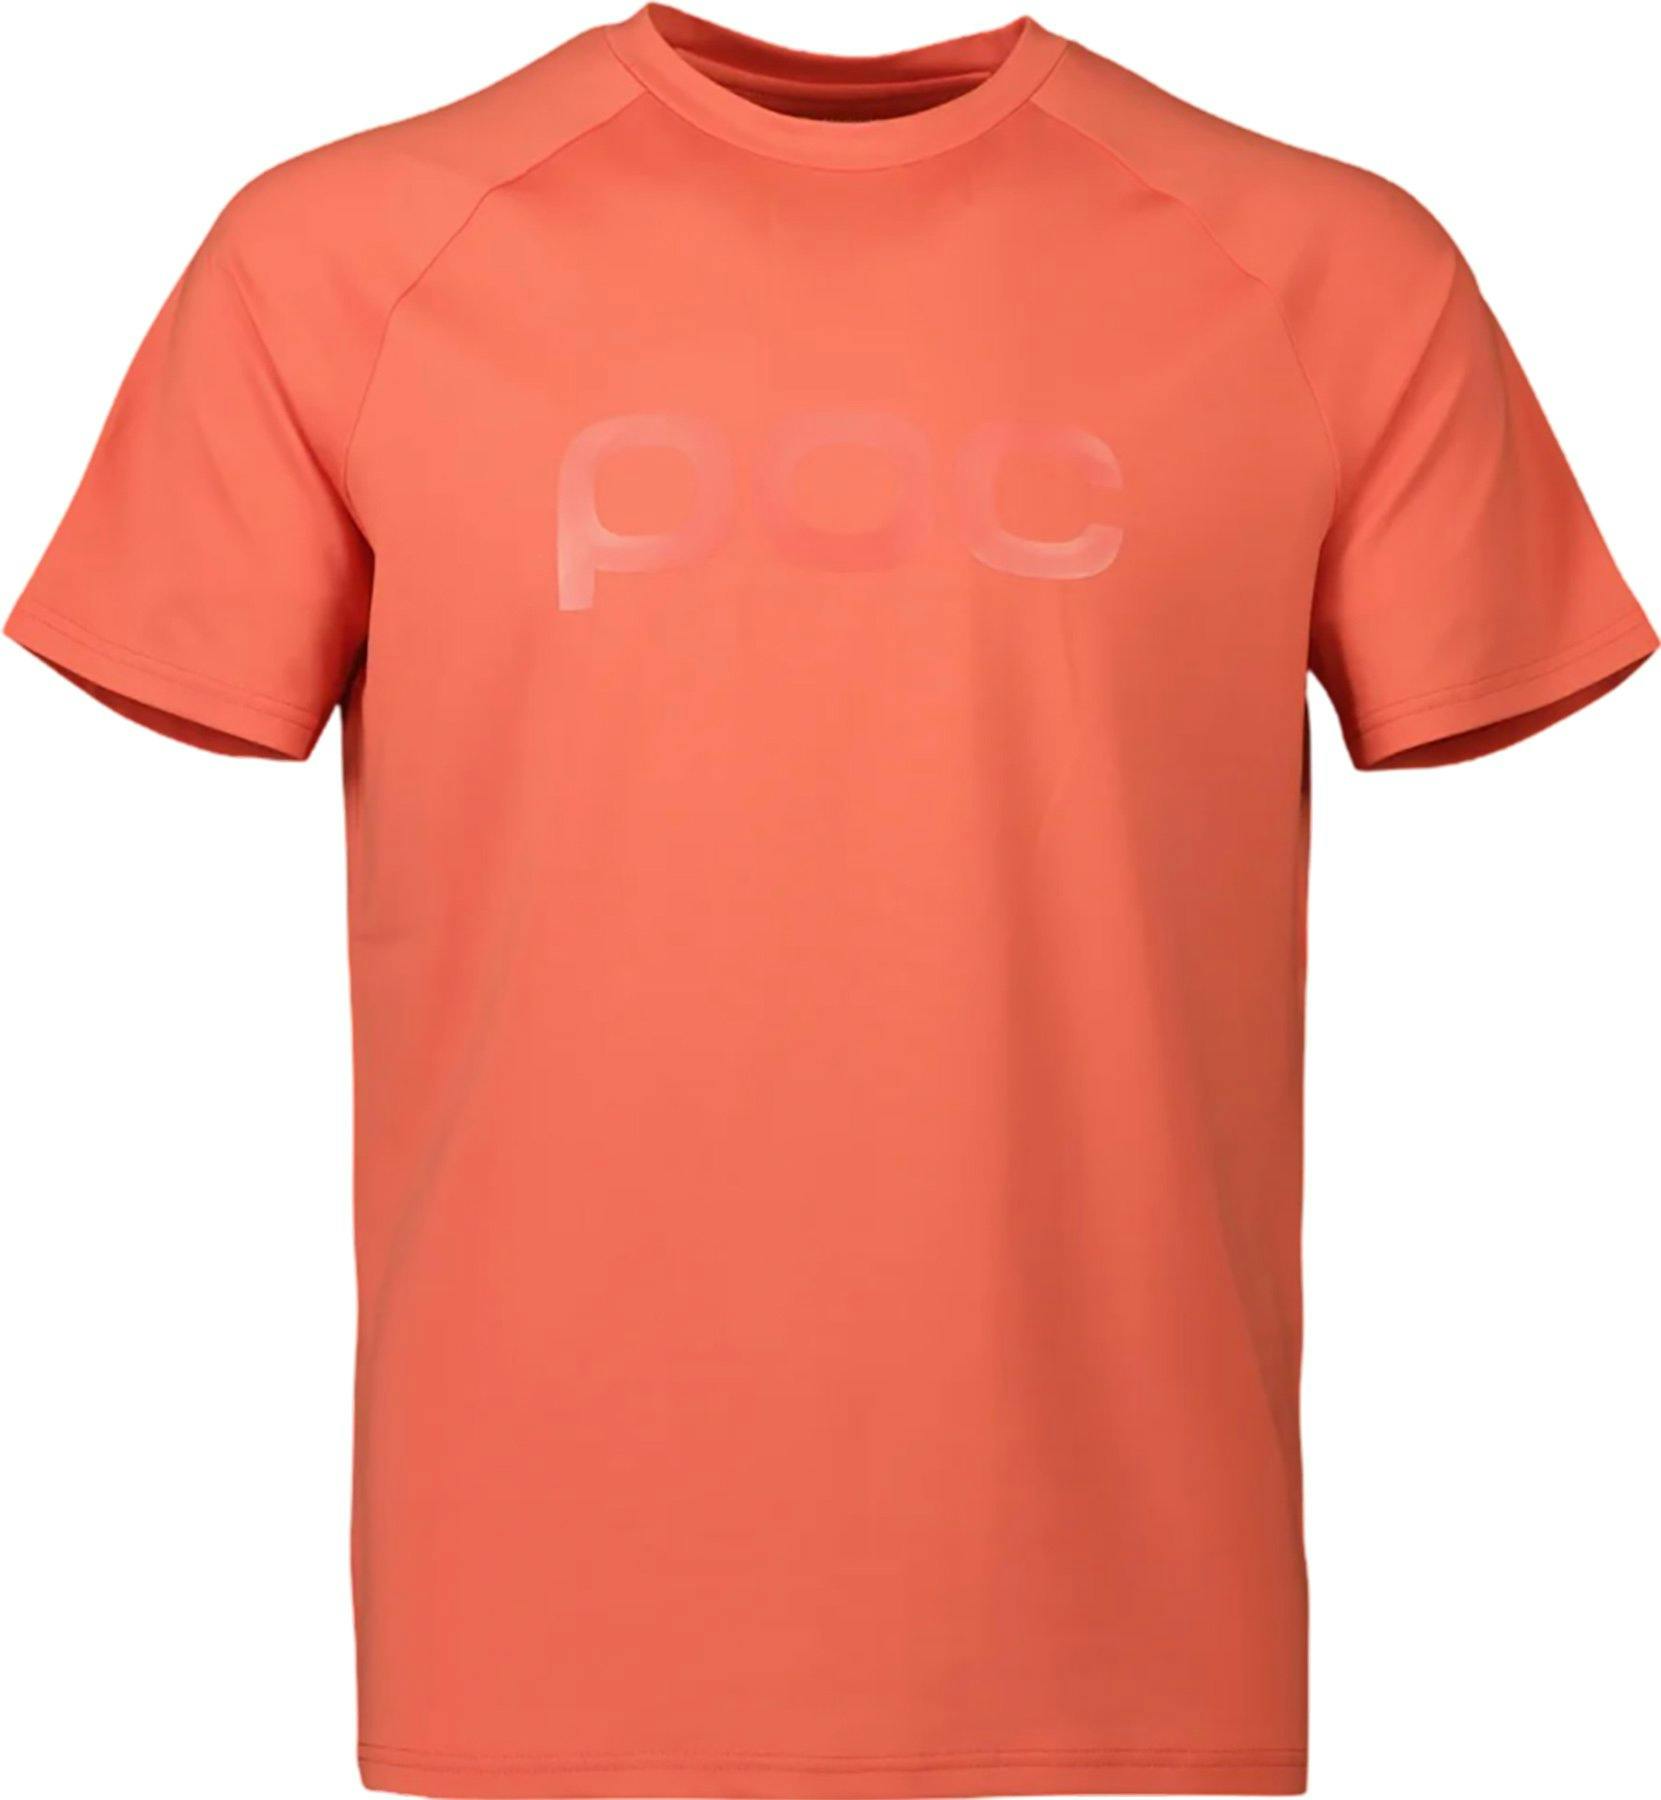 Product image for Reform Enduro Tee - Men's